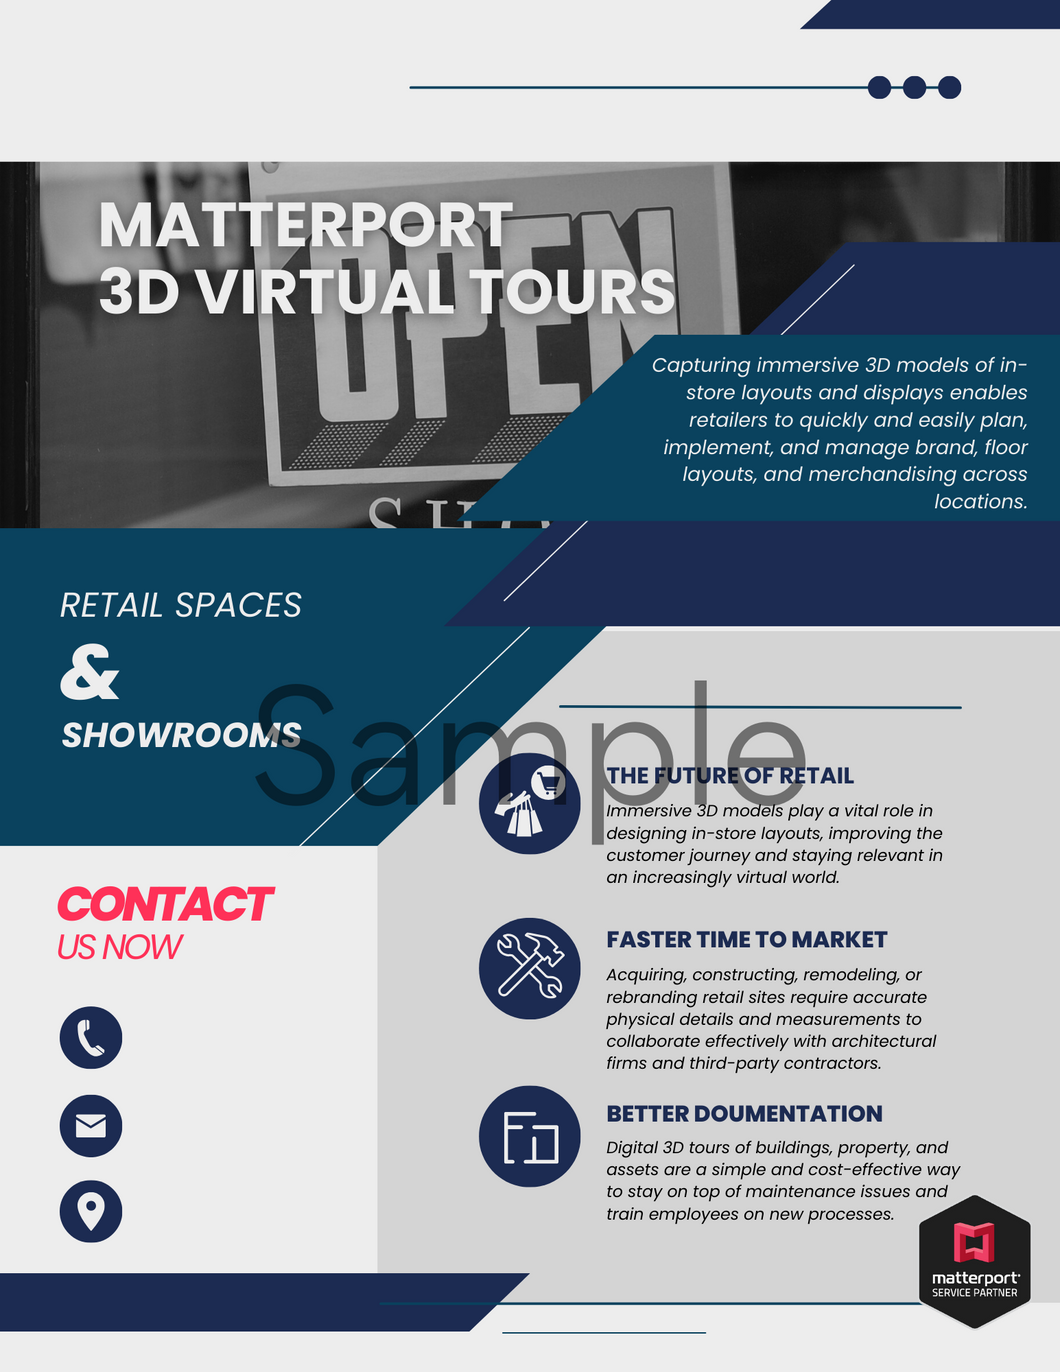 Matterport Marketing for Retail Spaces and Showrooms-Blue